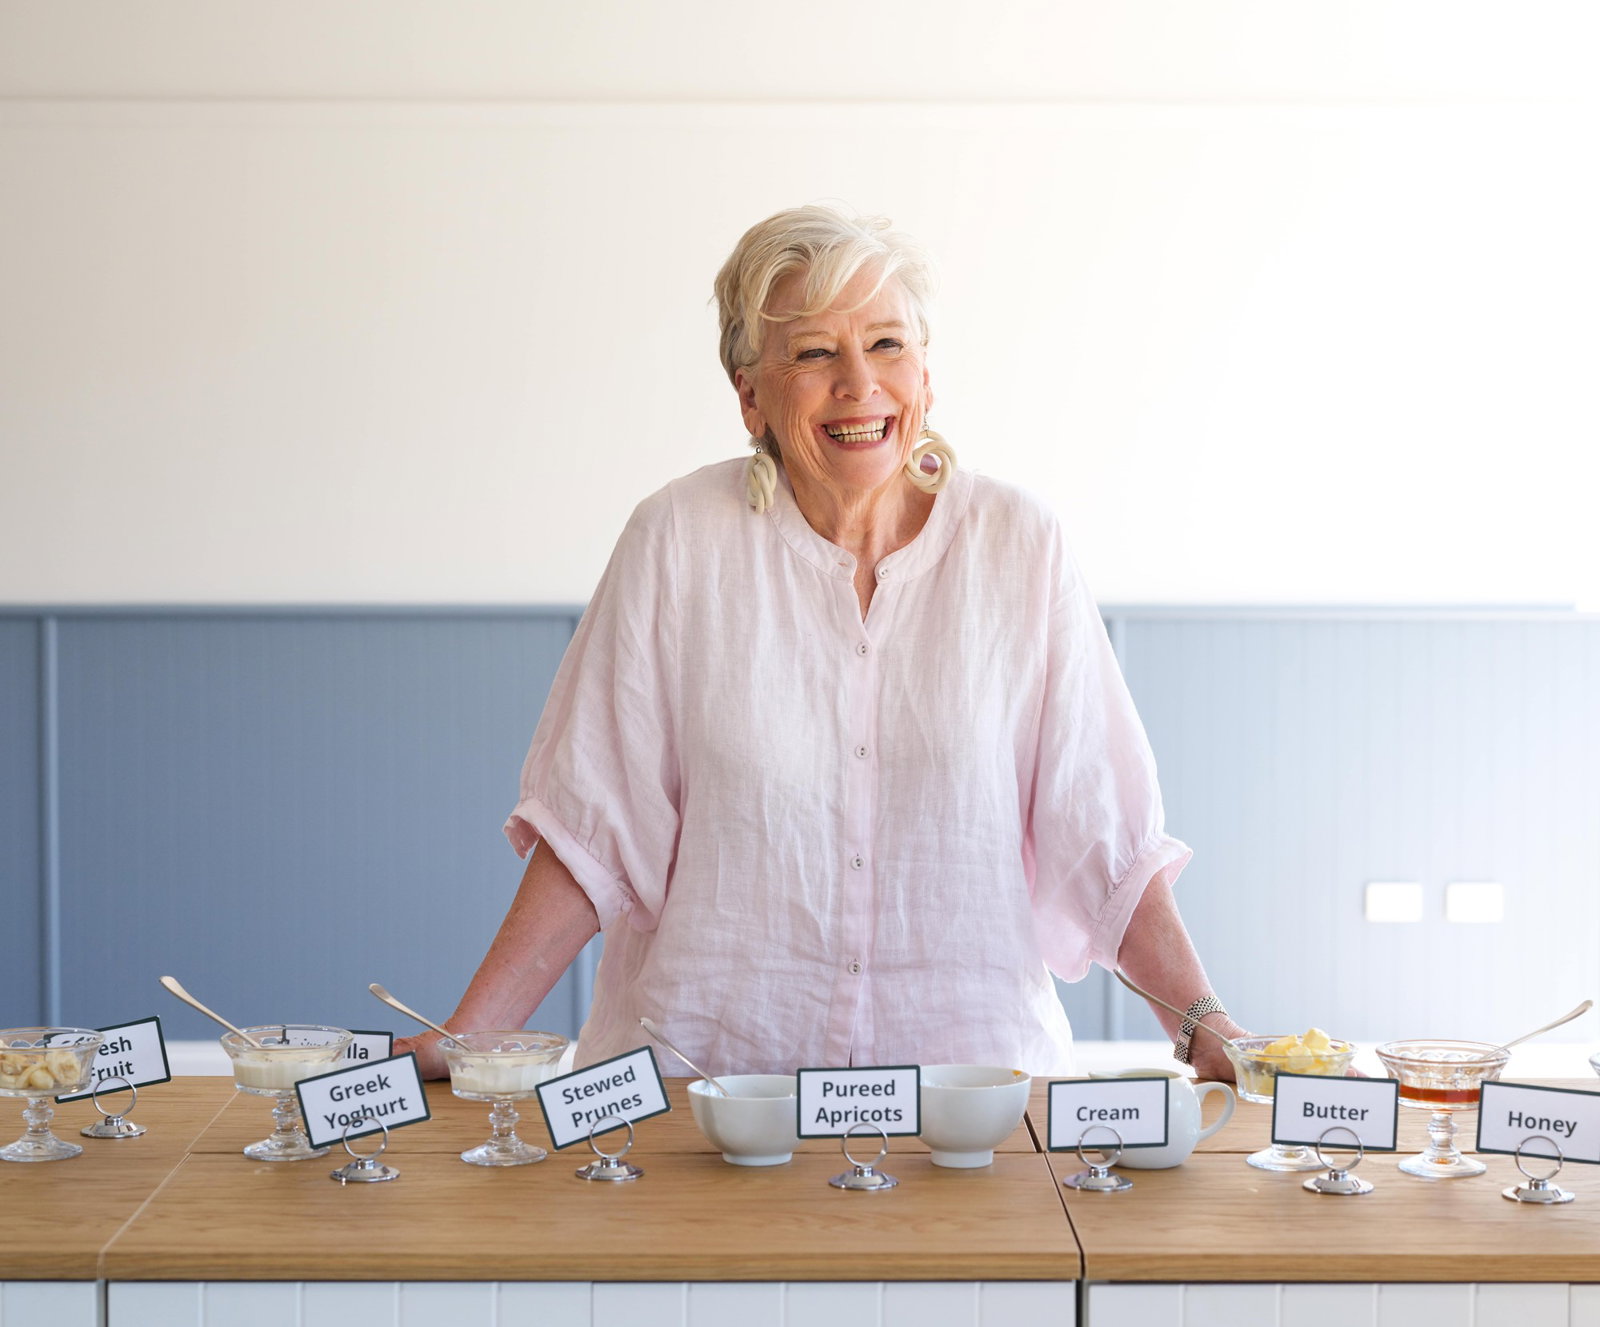 A smiling Maggie Beer stands at a bench before an assortment of bowls of food, including Greek yoghurt and pureed apricots. 